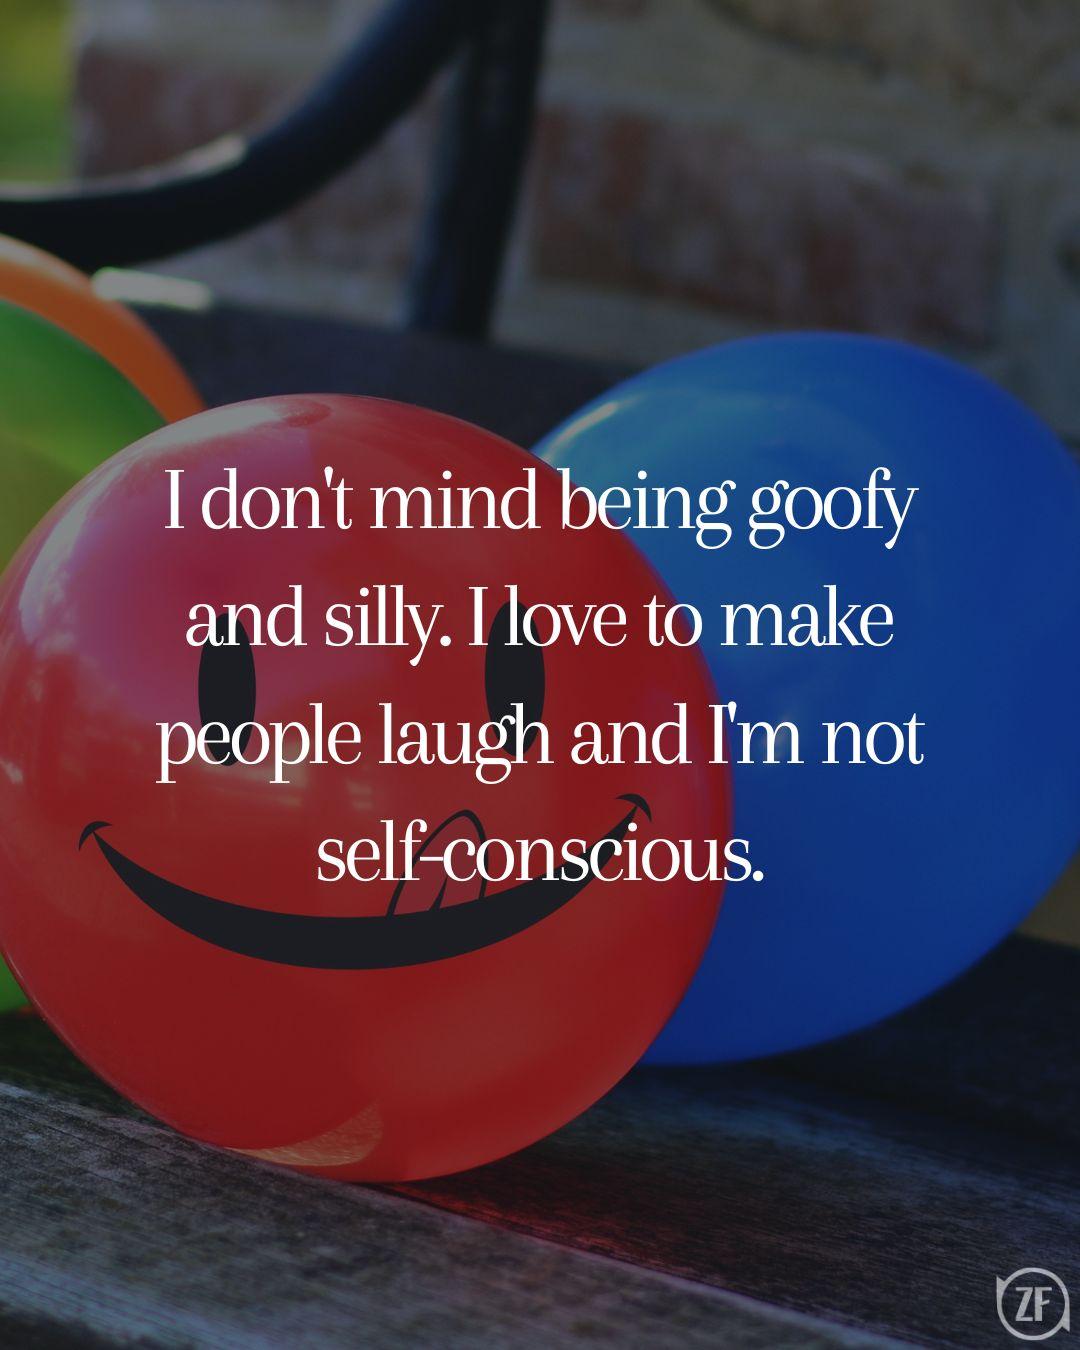 I don't mind being goofy and silly. I love to make people laugh and I'm not self-conscious.